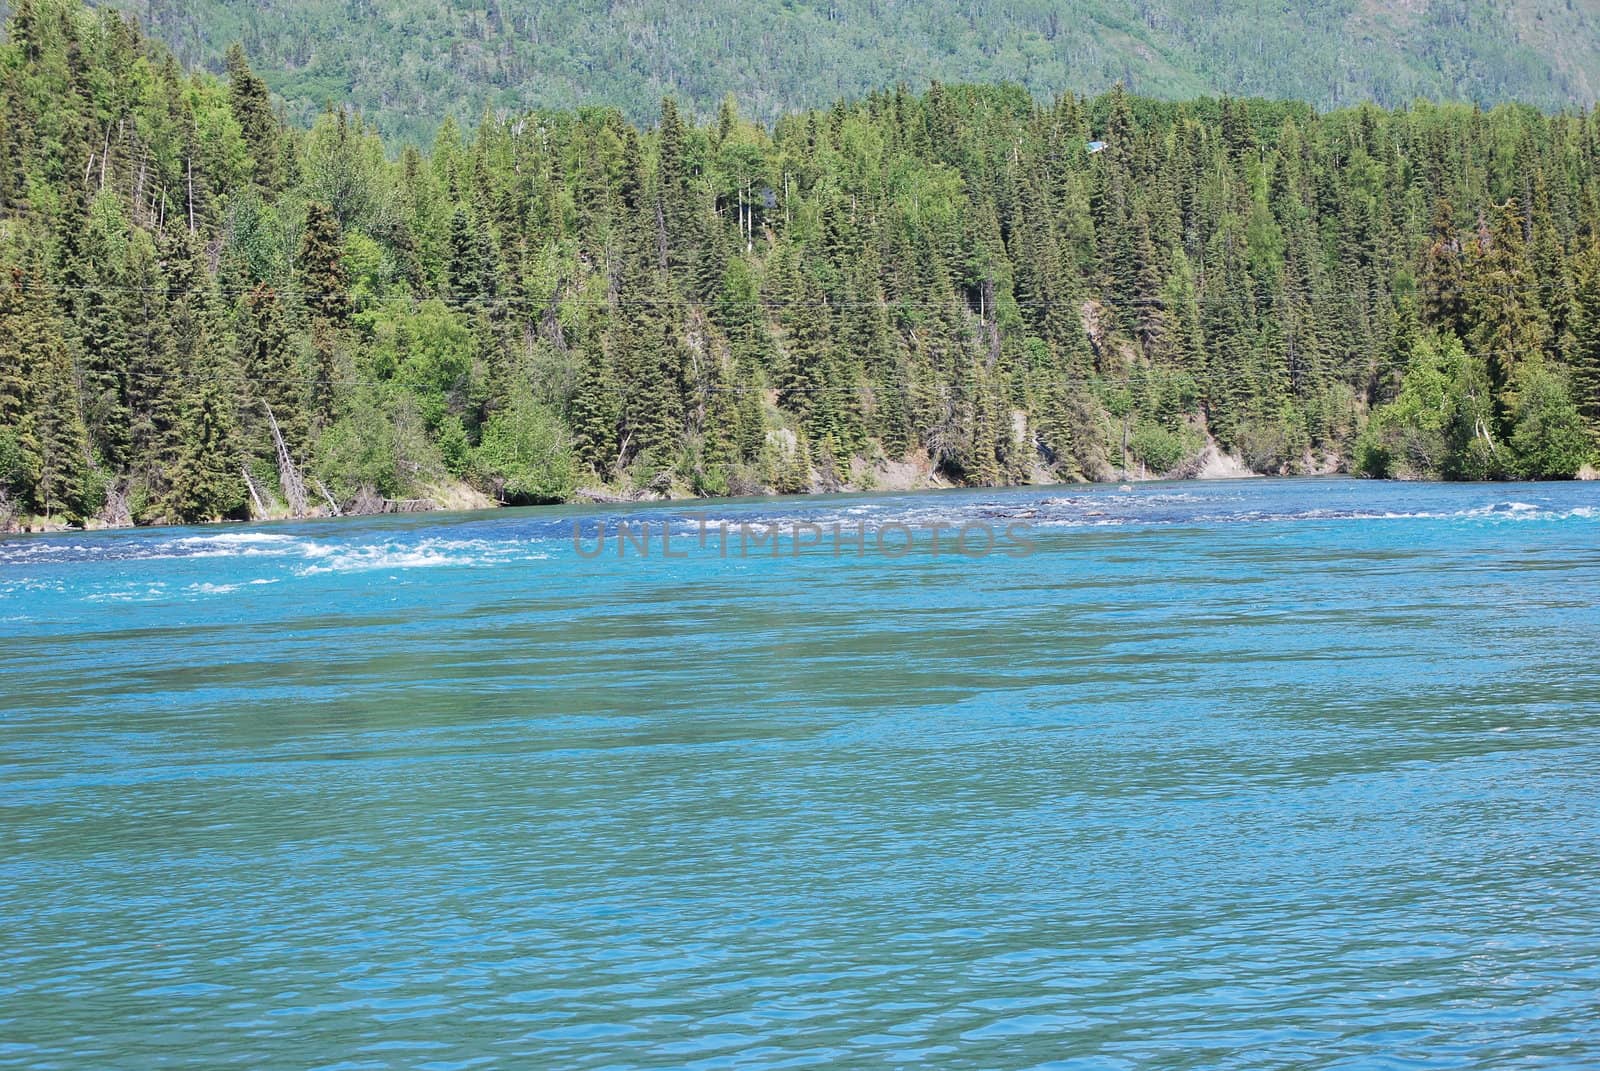 A section of the Kenai River in Alaska